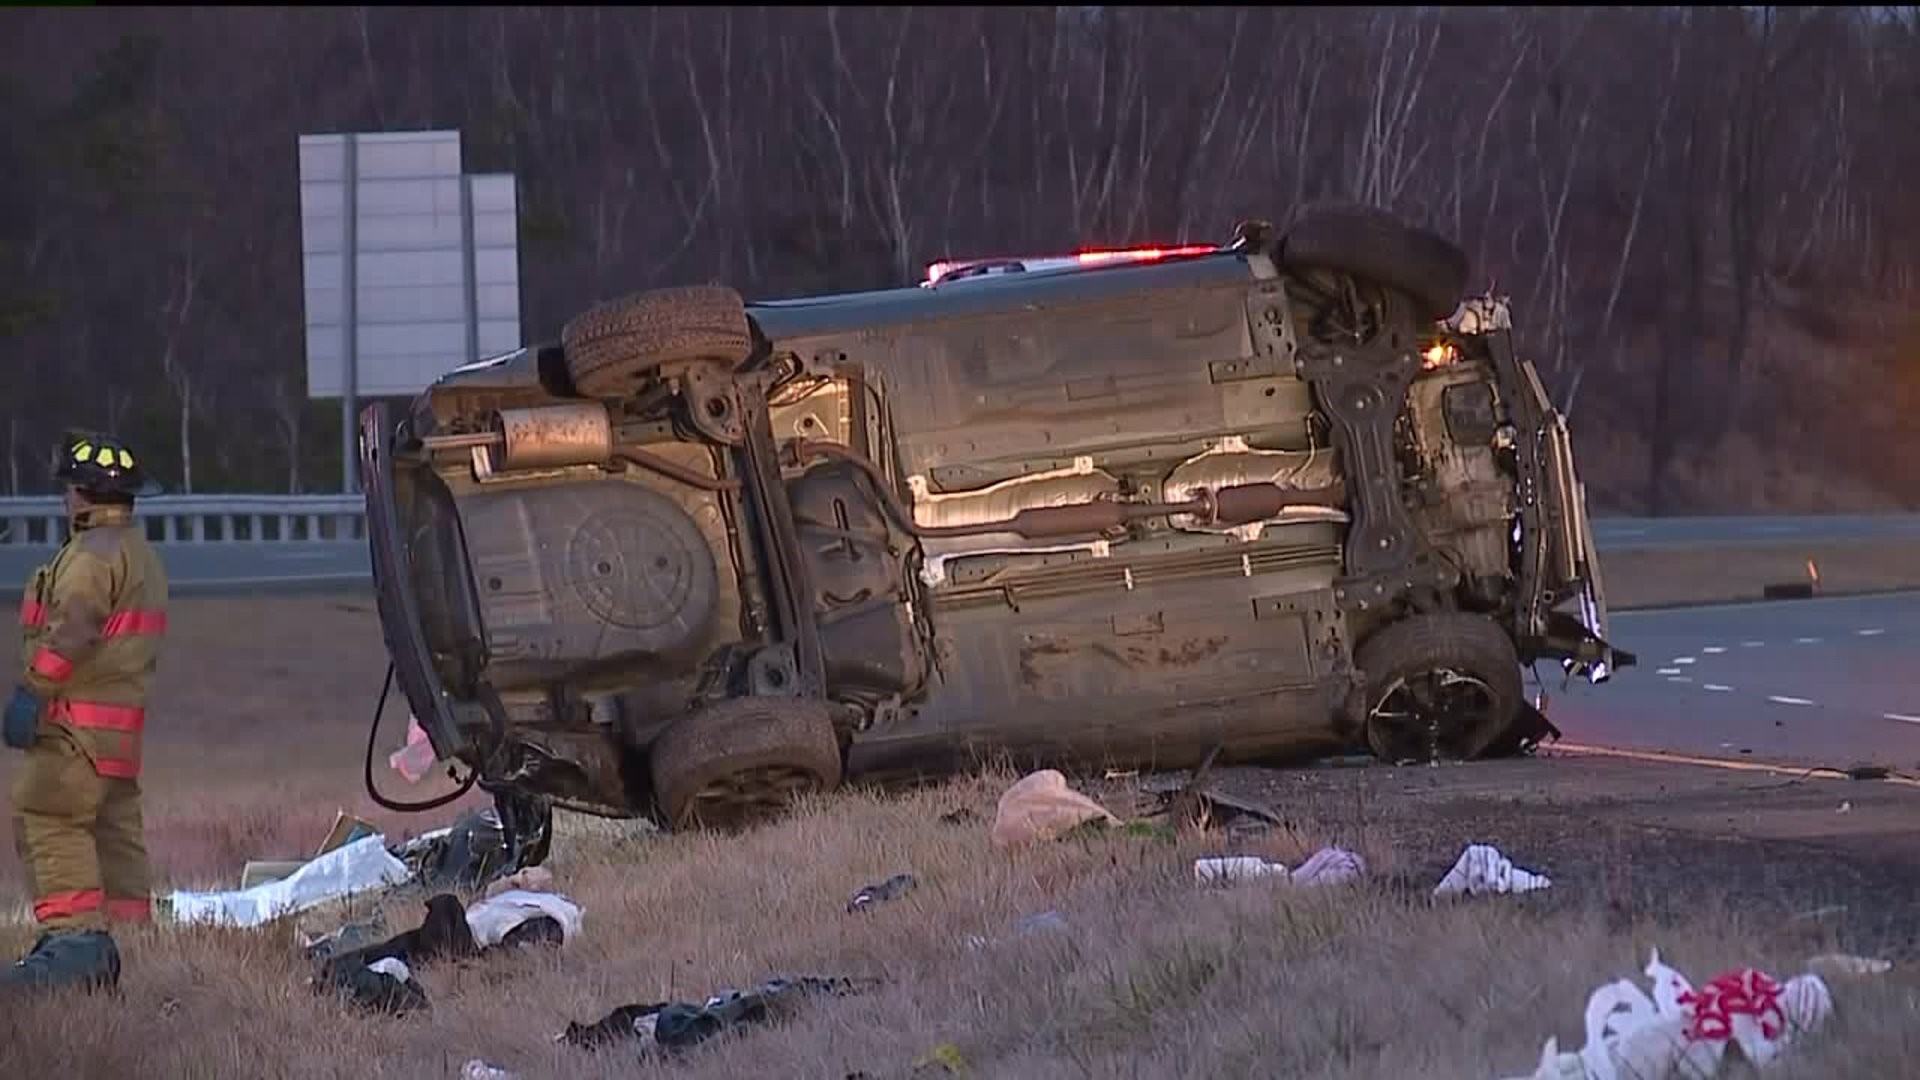 Thanksgiving Day Interstate Accident Turns Deadly